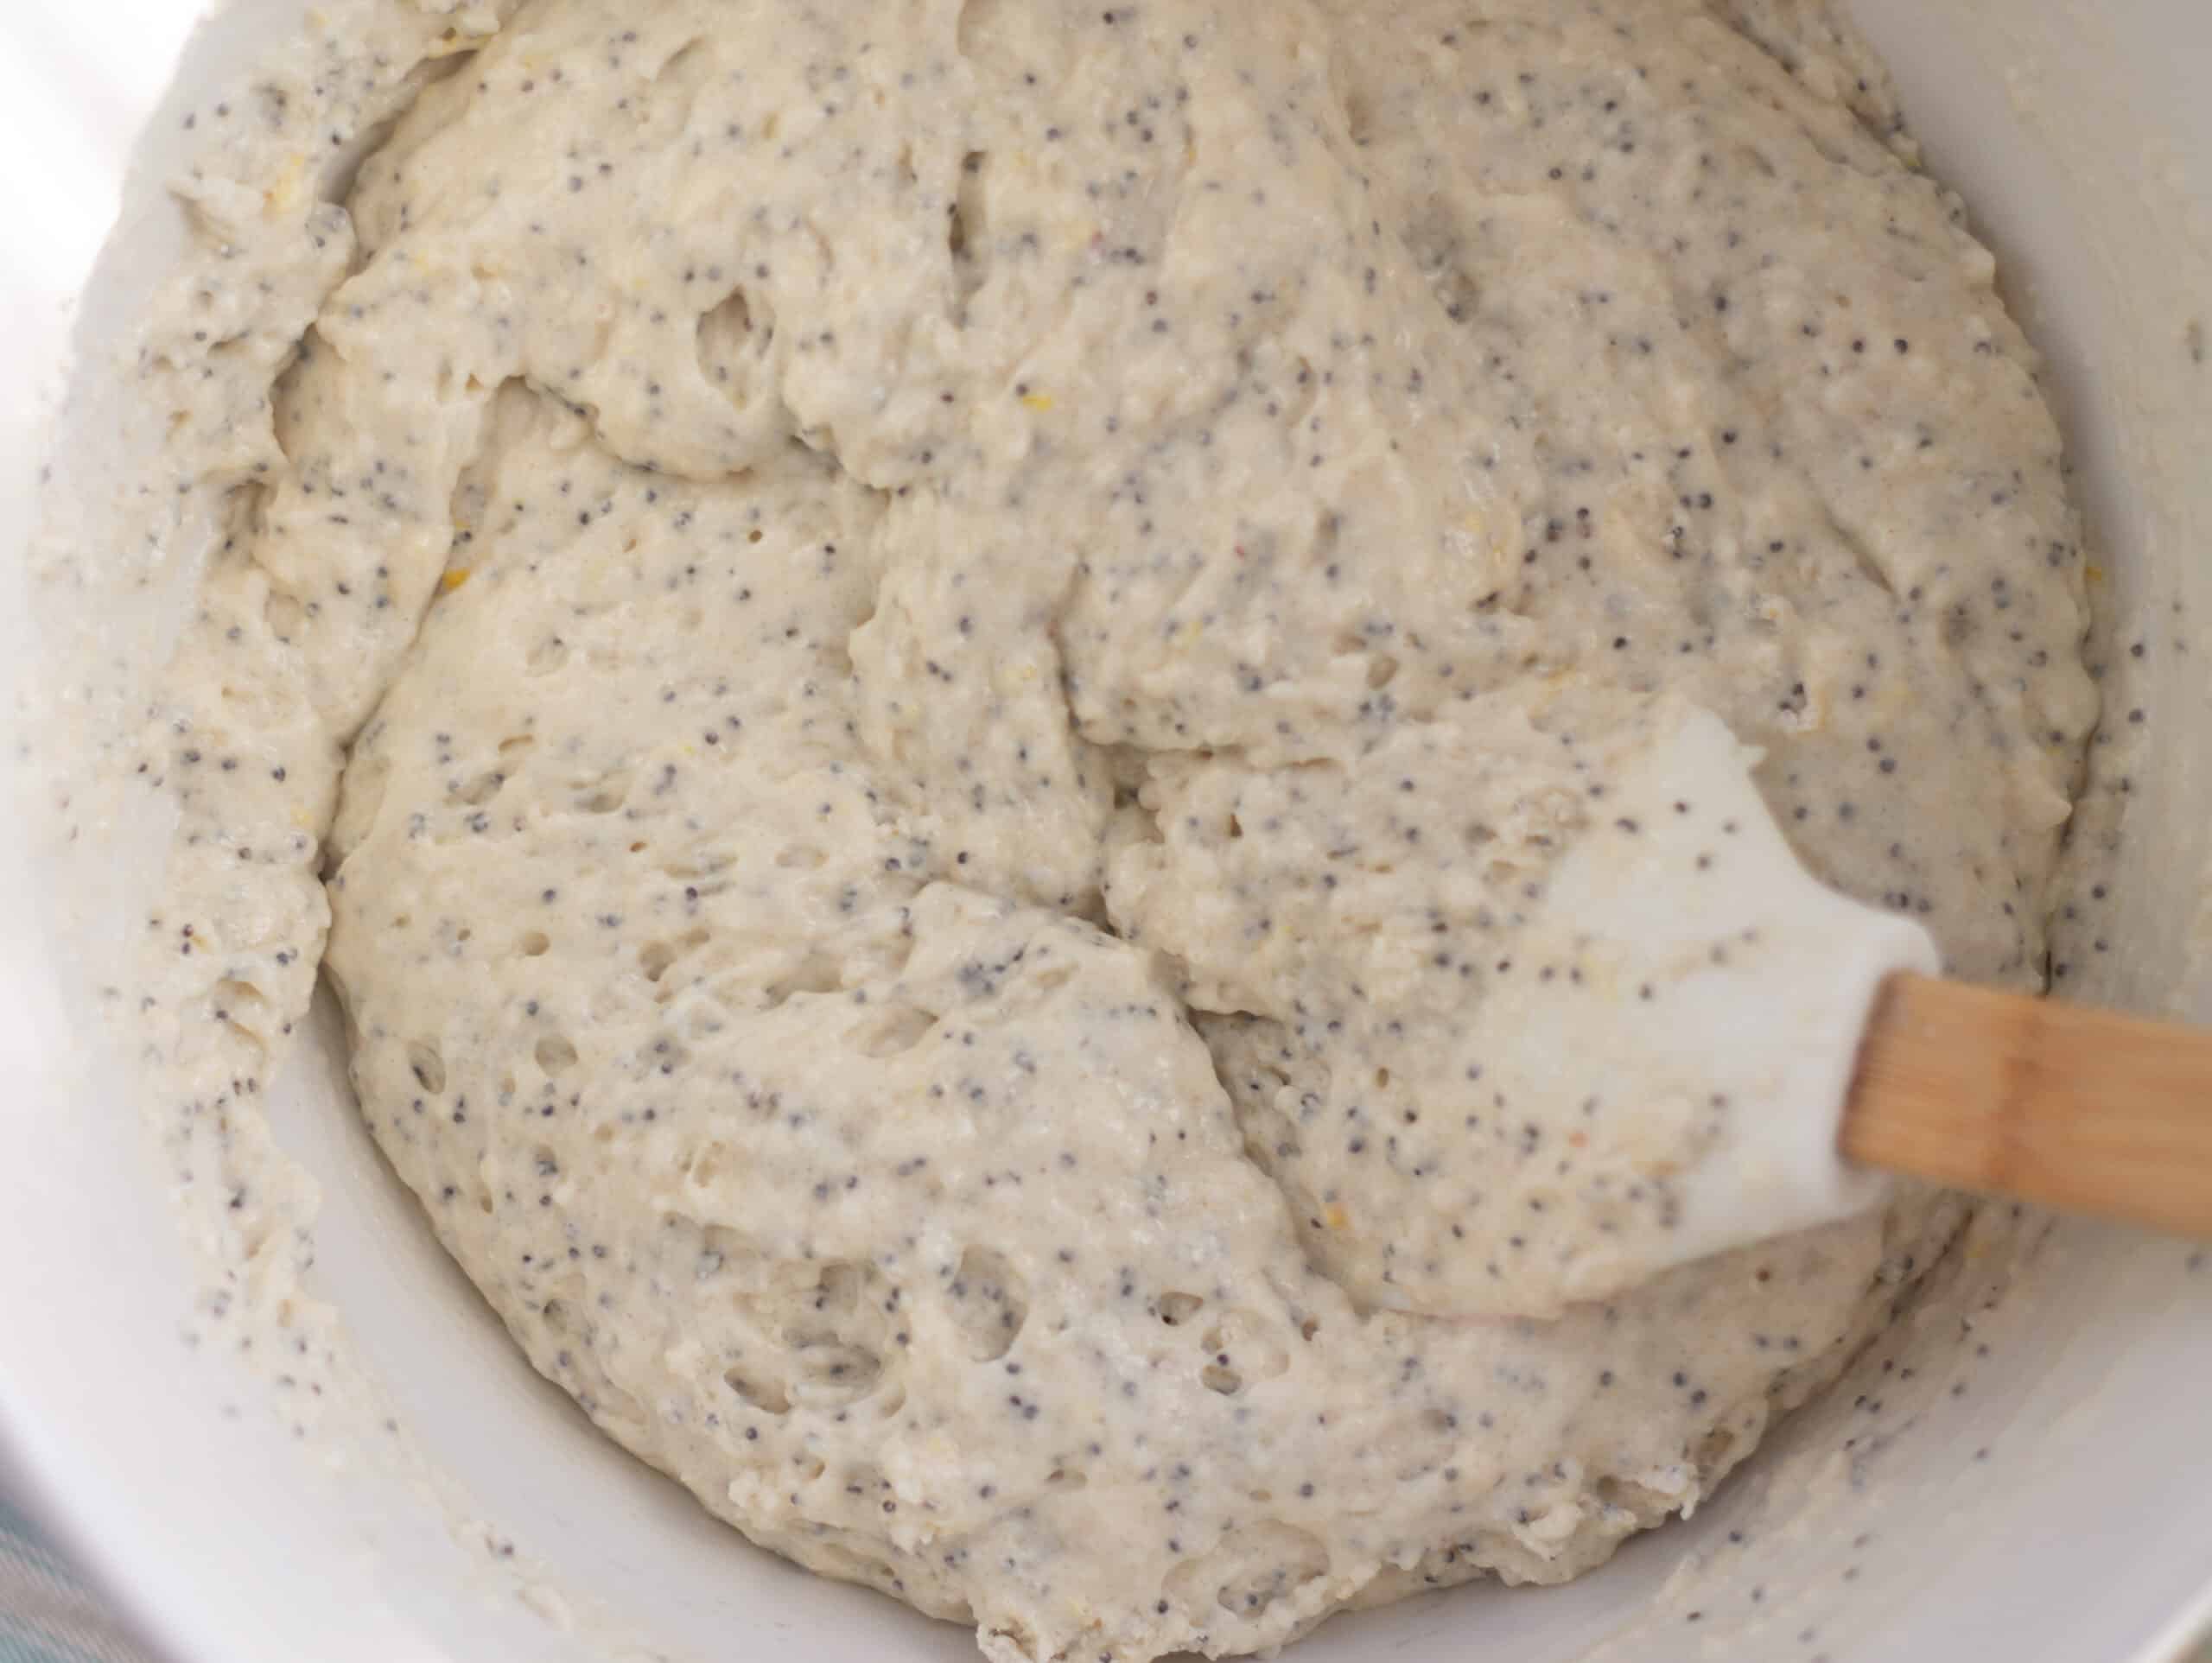 Mixing muffin batter